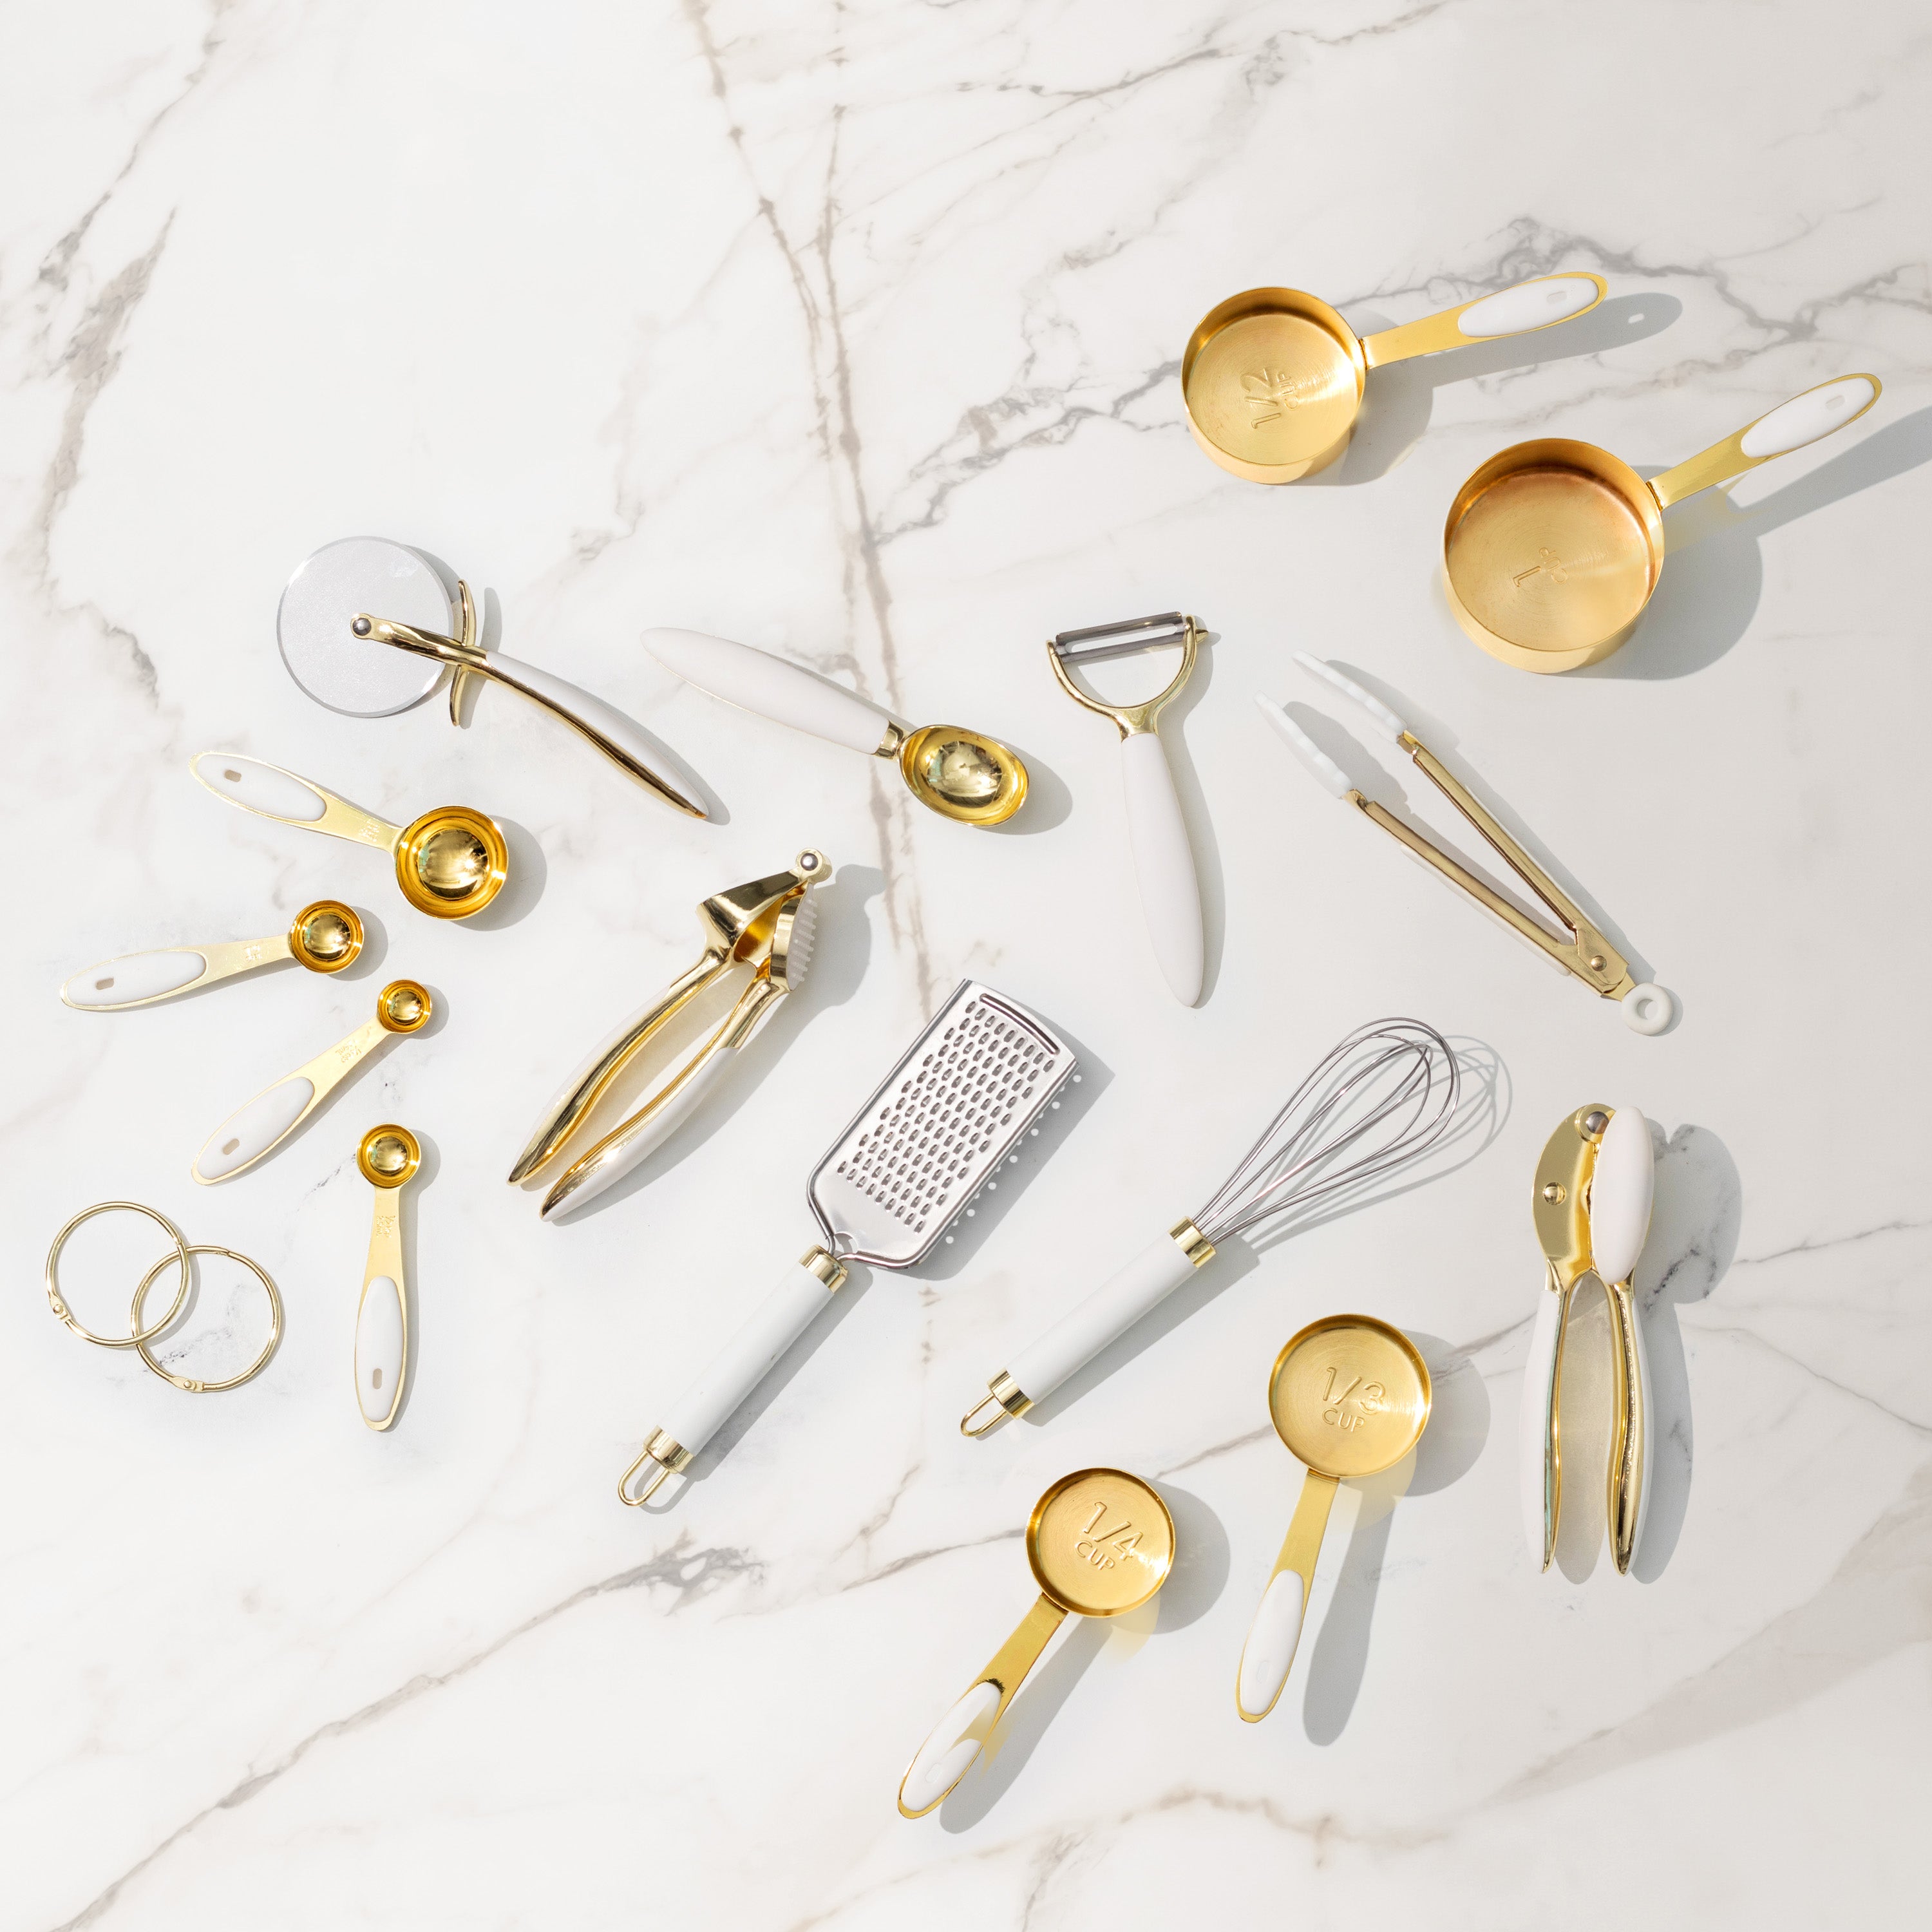 White and Gold Kitchen Tools Set - Styled Settings